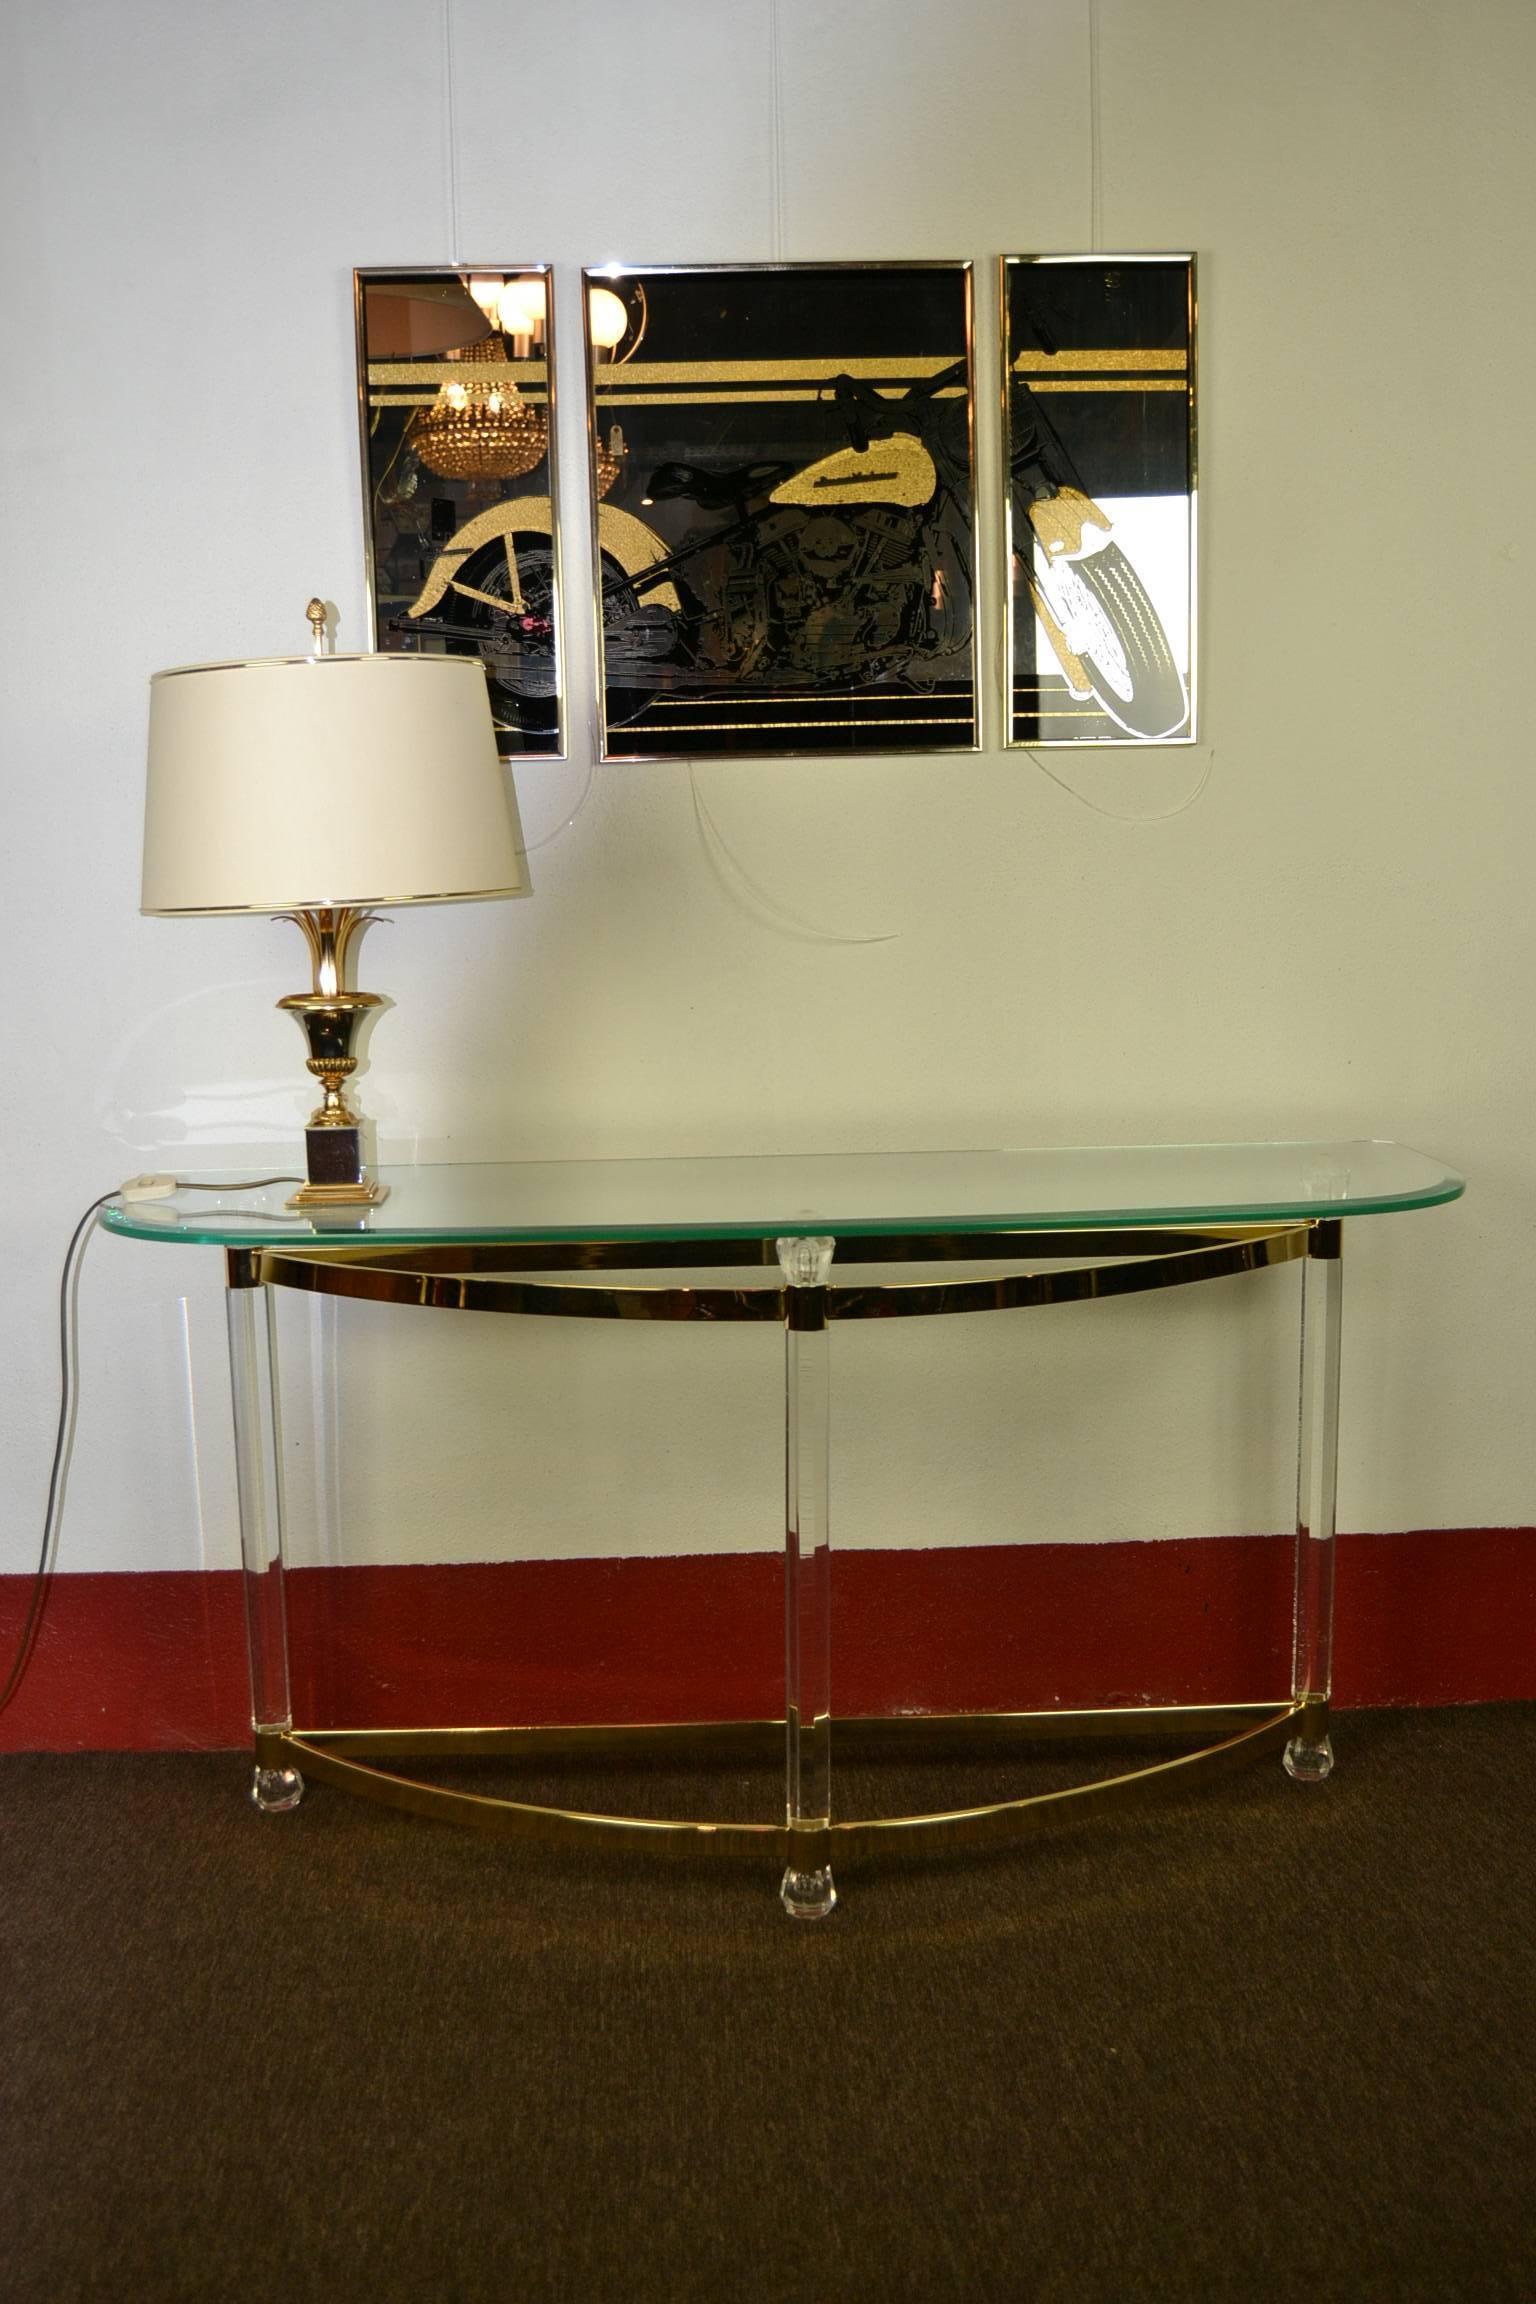 Elegant 1970s Lucite Console Table or Side Table with Glass Top.  
This Table in Hollywood Regency Style 
is made of Clear Perspex -  Plexiglass with Brass Feet , 
and has a Rounded Facet Glass Top. 
This Stylish Table is in good vintage condition.